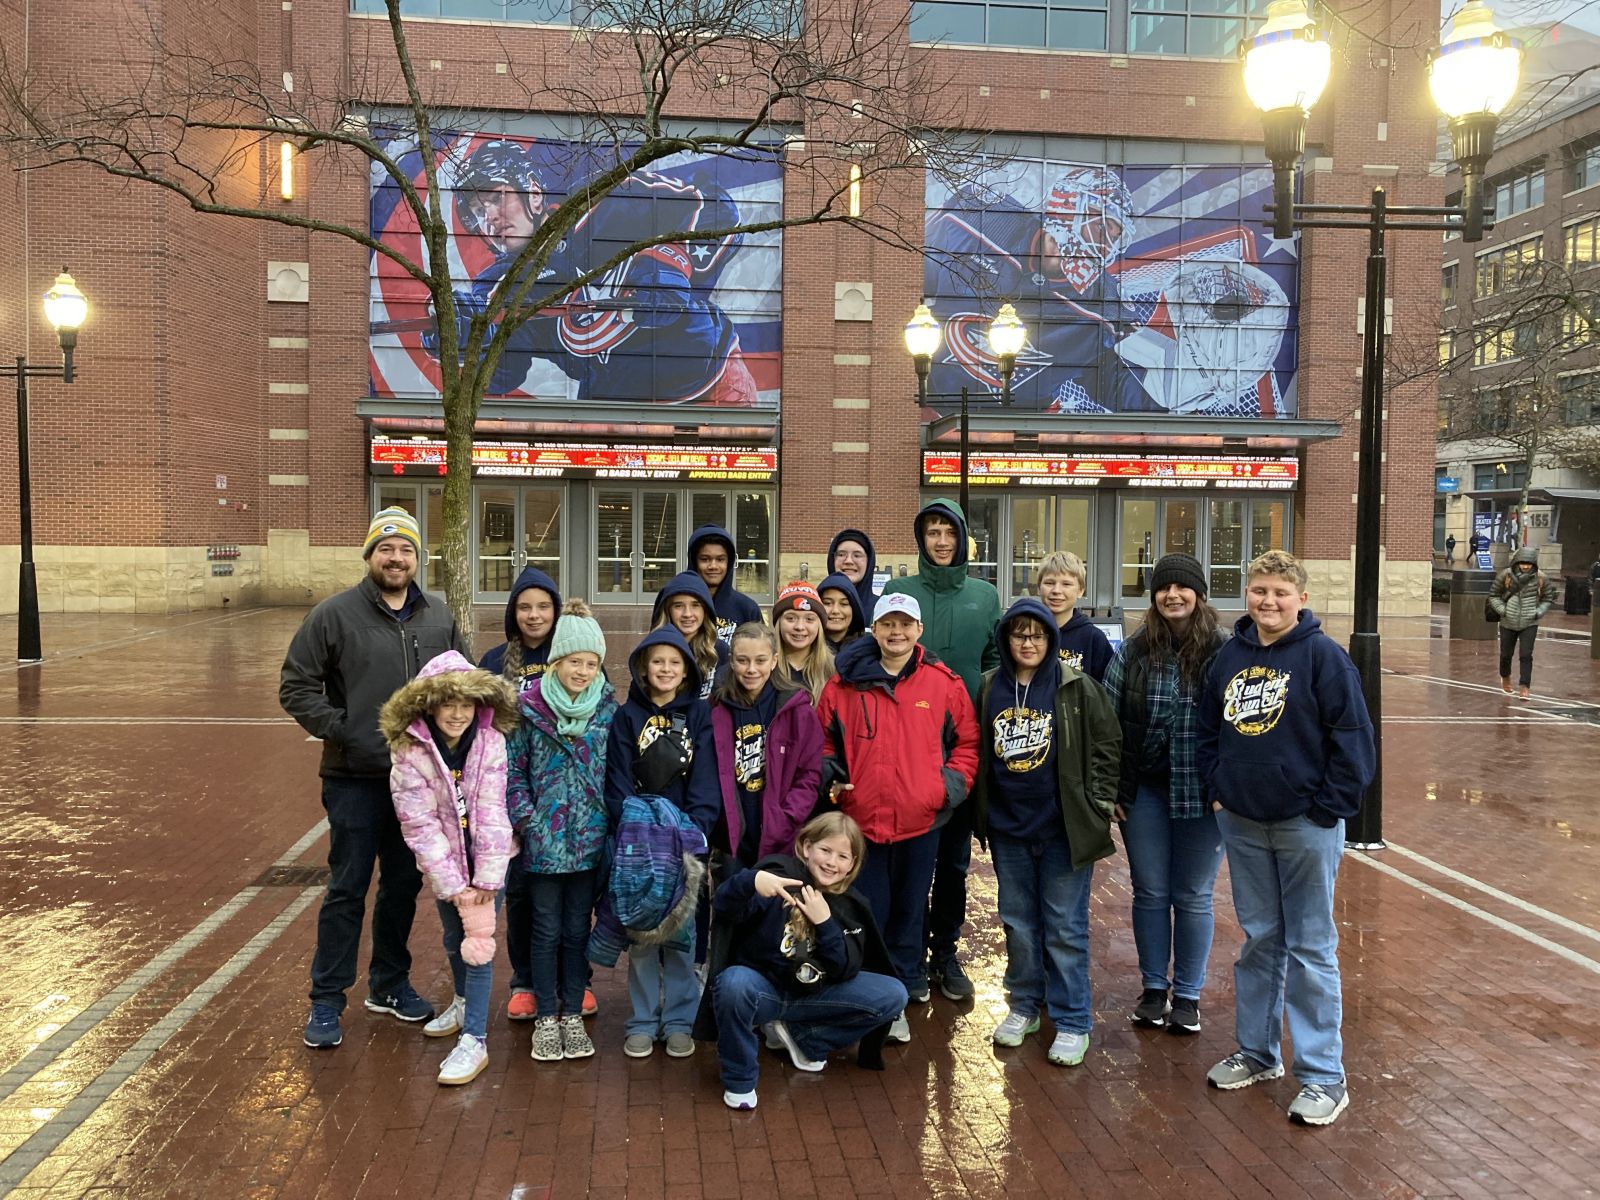 The grades 5-8 Student Council poses for a group picture outside the Columbus Blue Jackets home, Nationwide Arena, on Student Leadership Day.